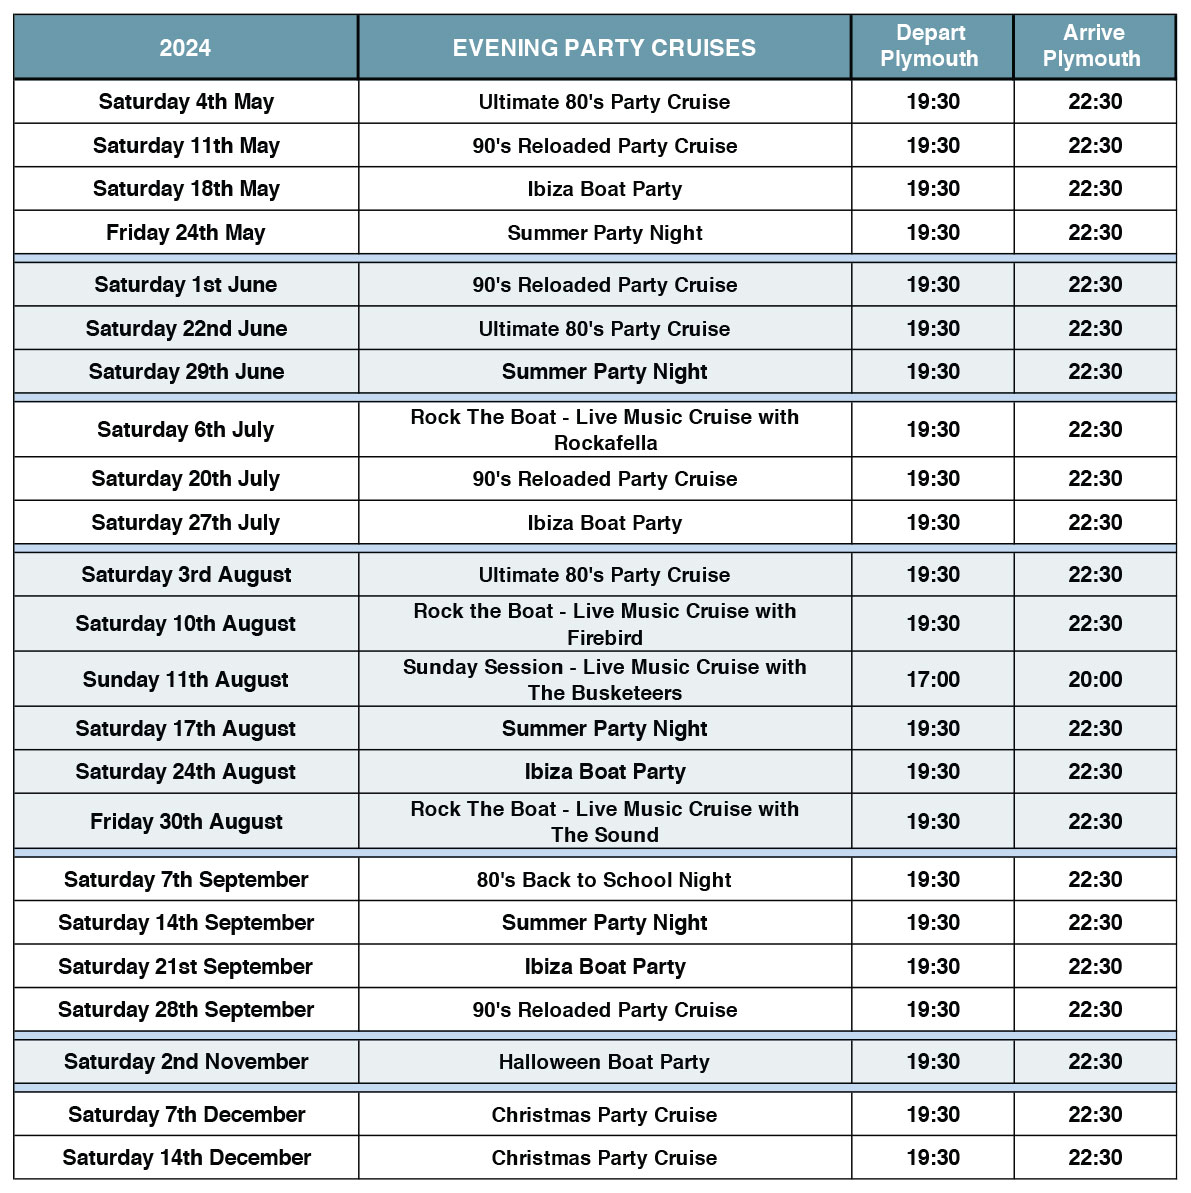 Adult Events & Party Cruises Timetable 2024